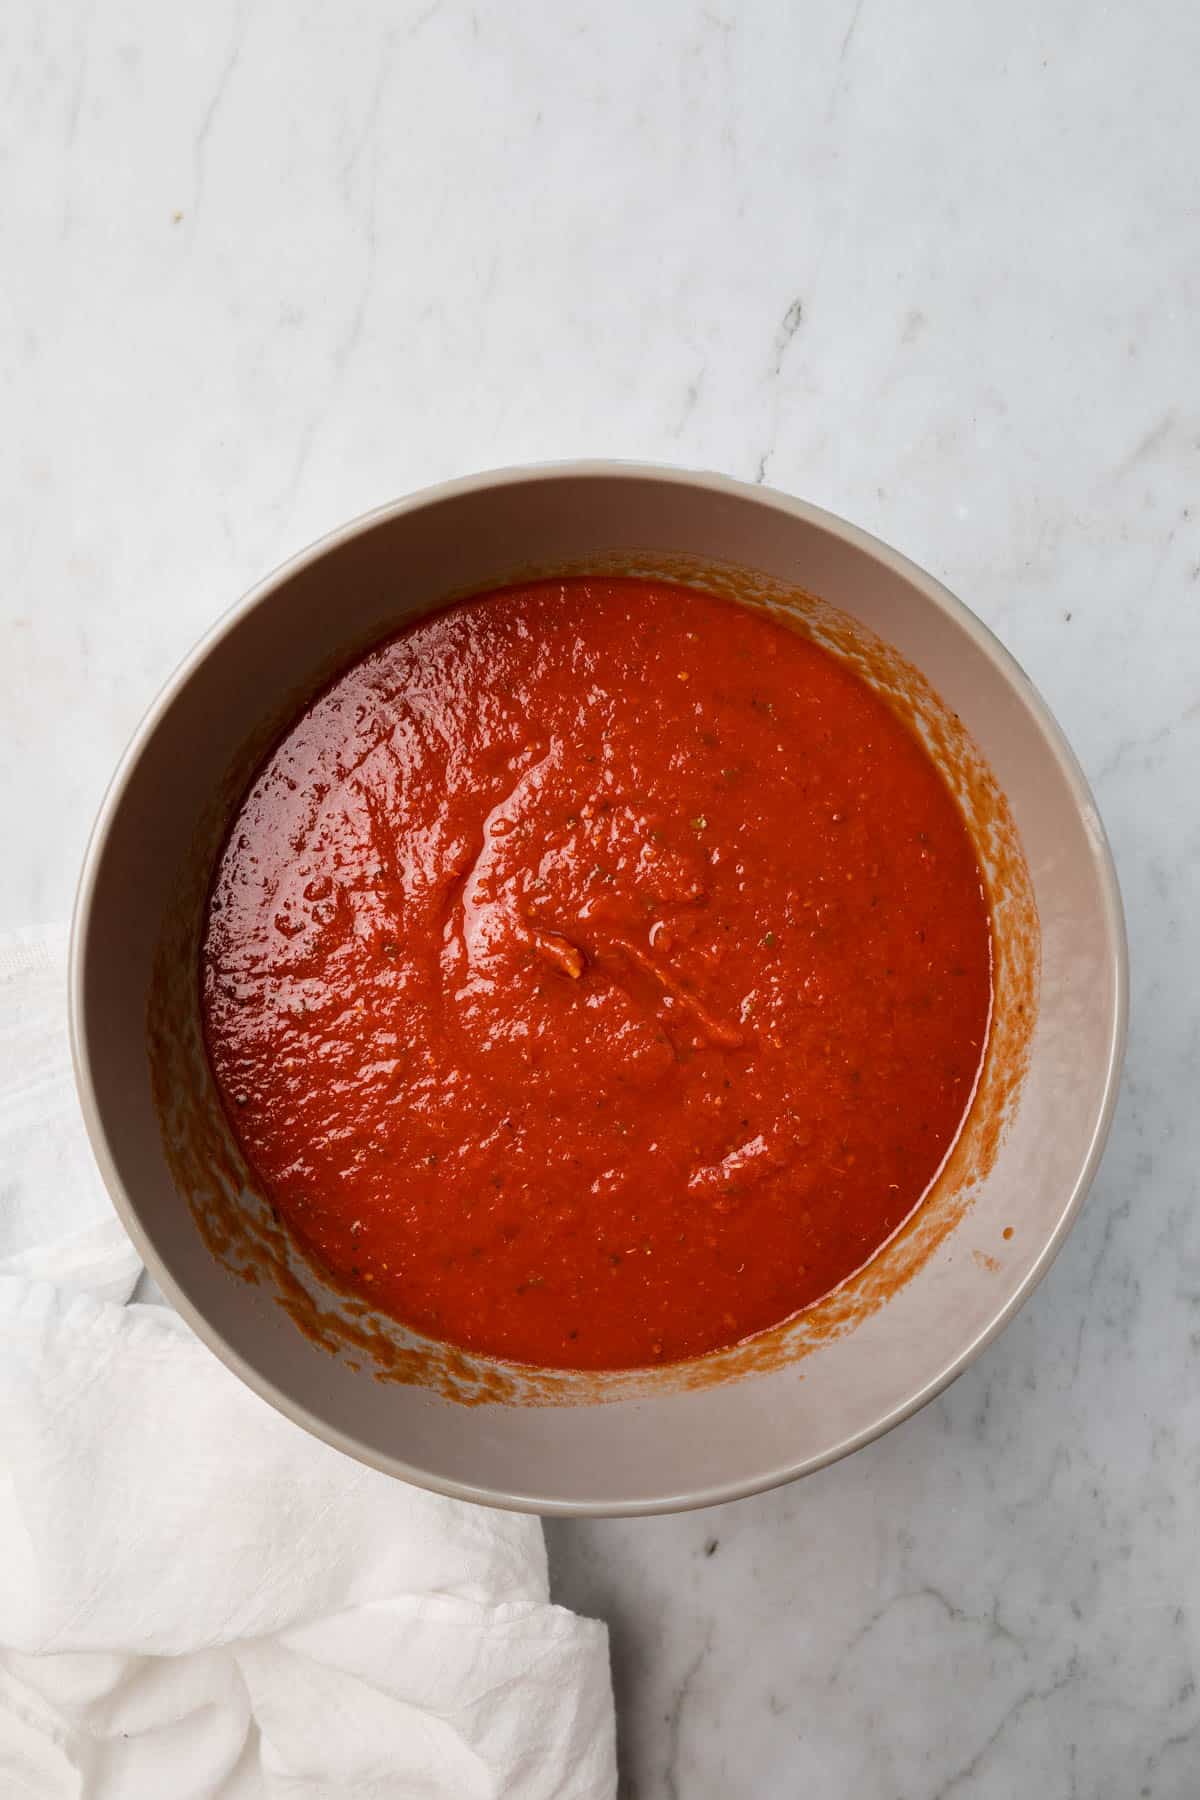 Combining tomato and mariana sauces in a bowl.